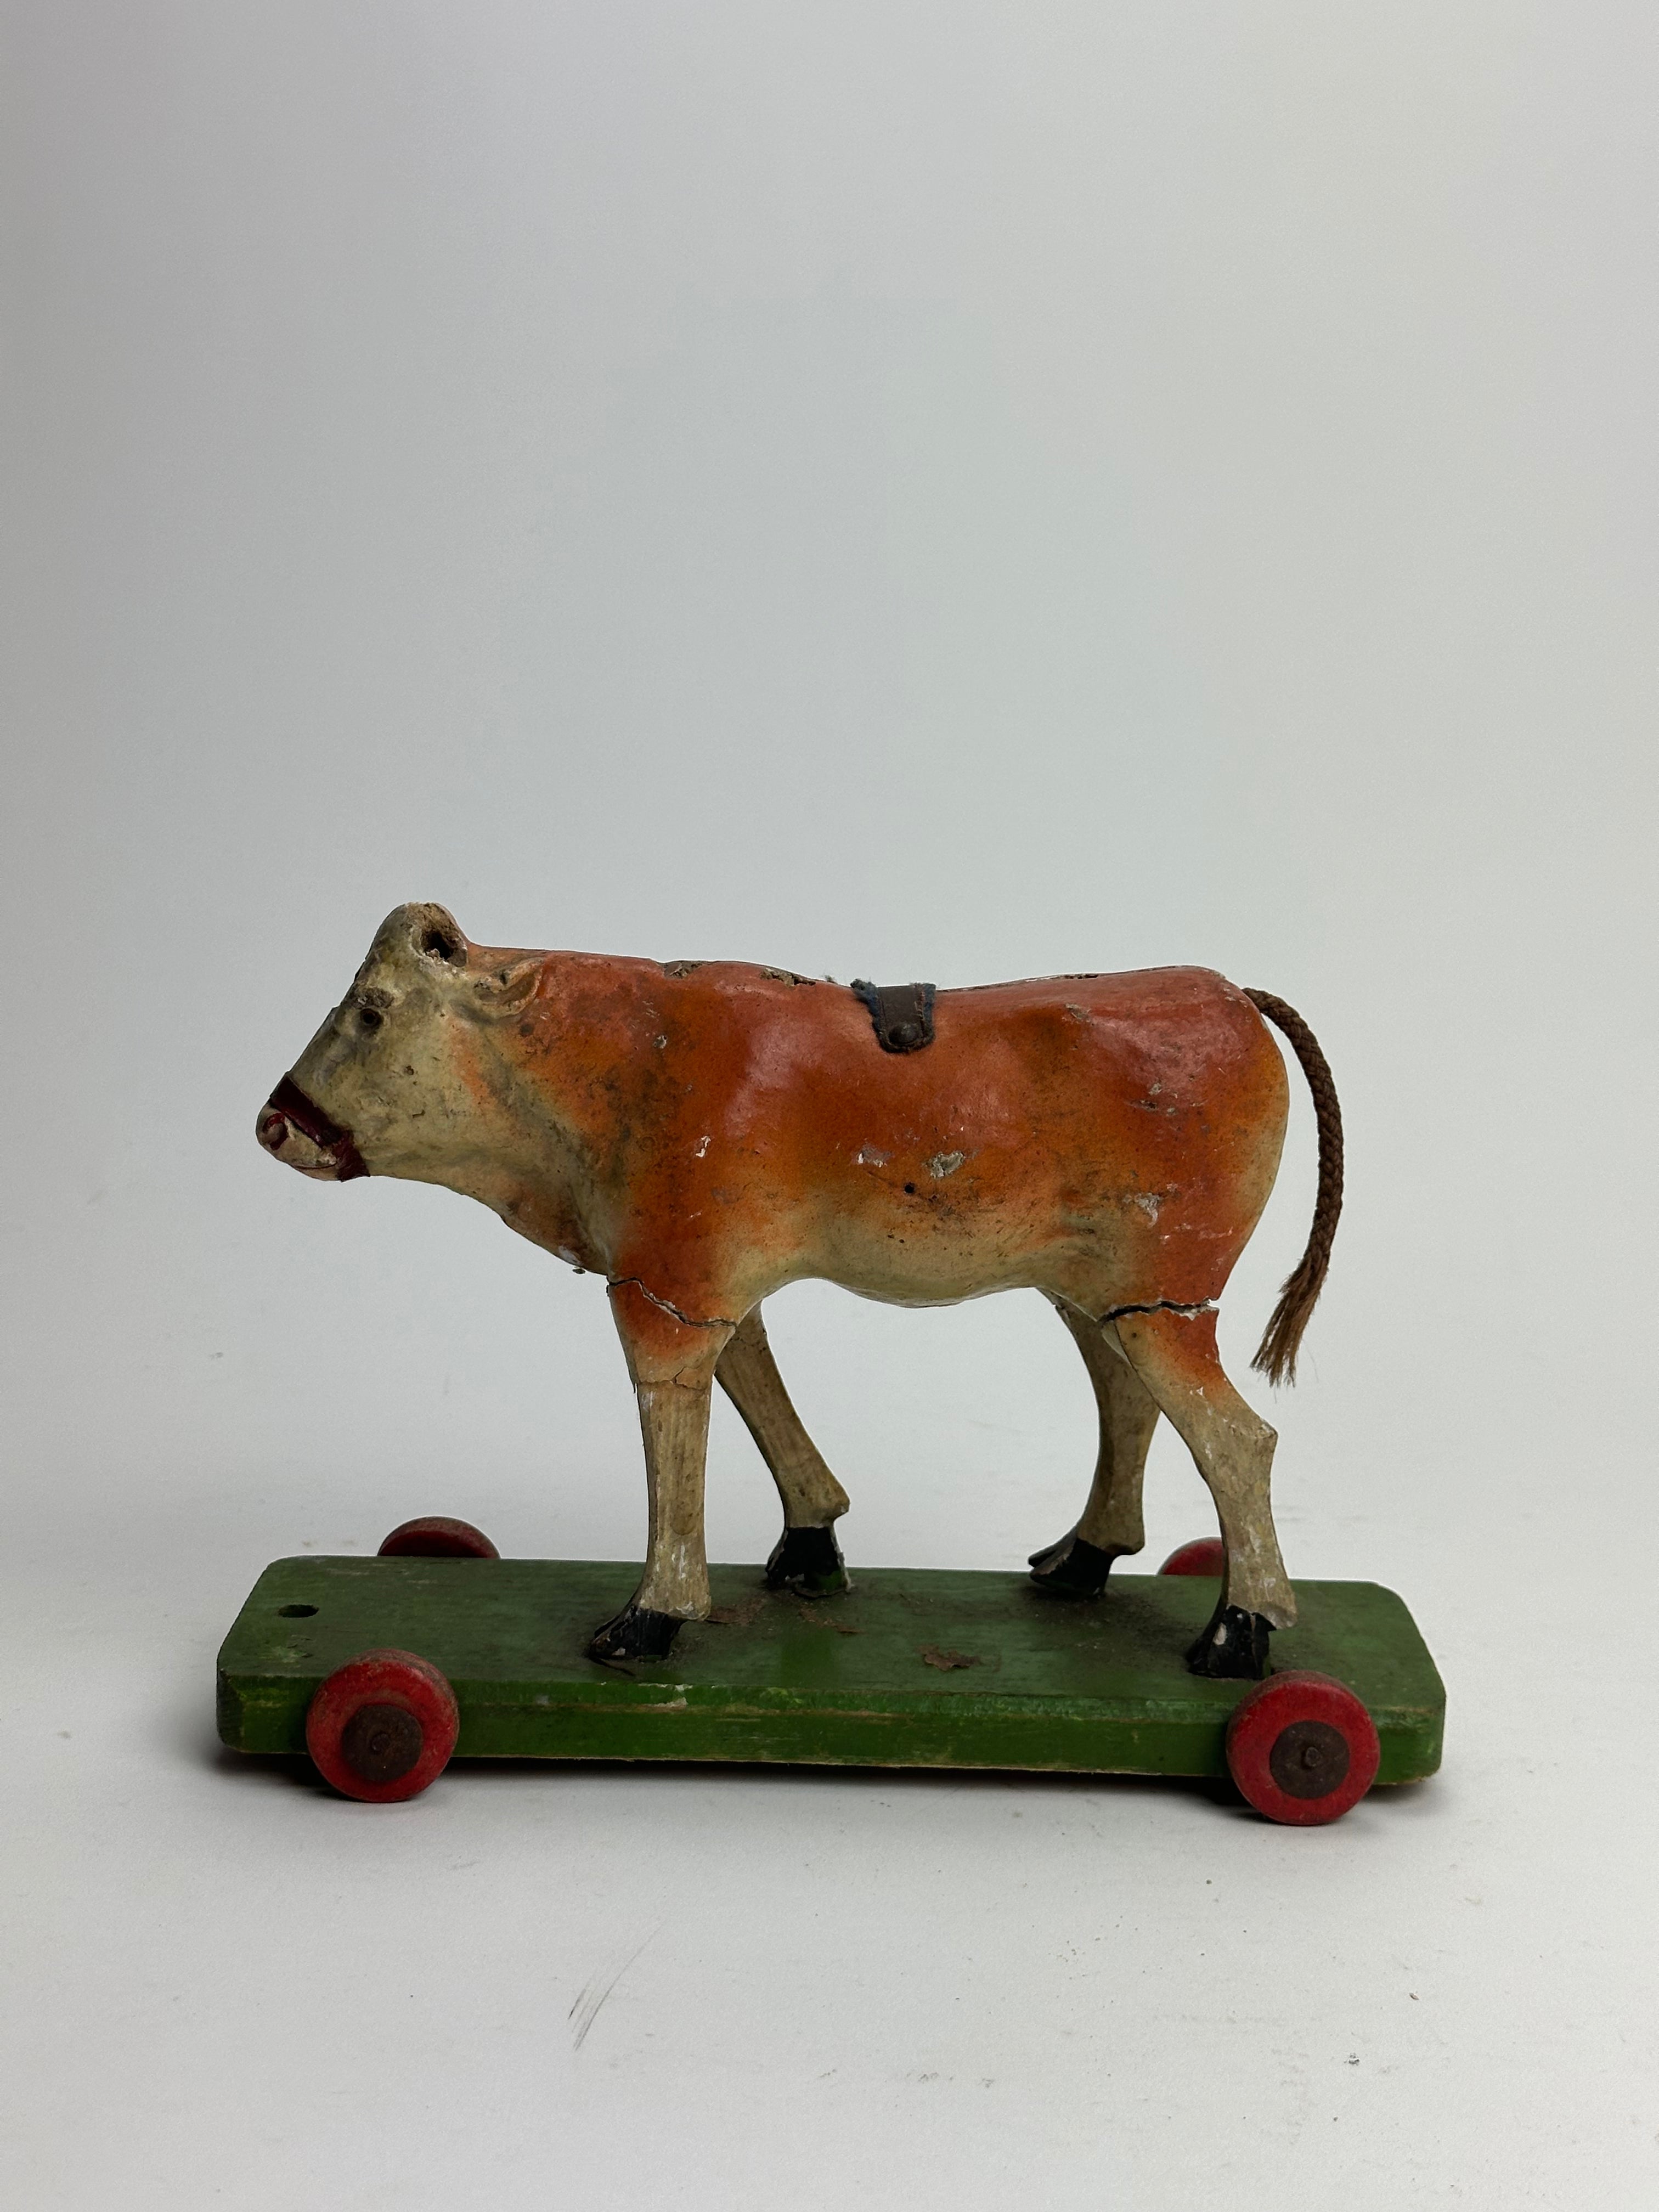 Cow Toy